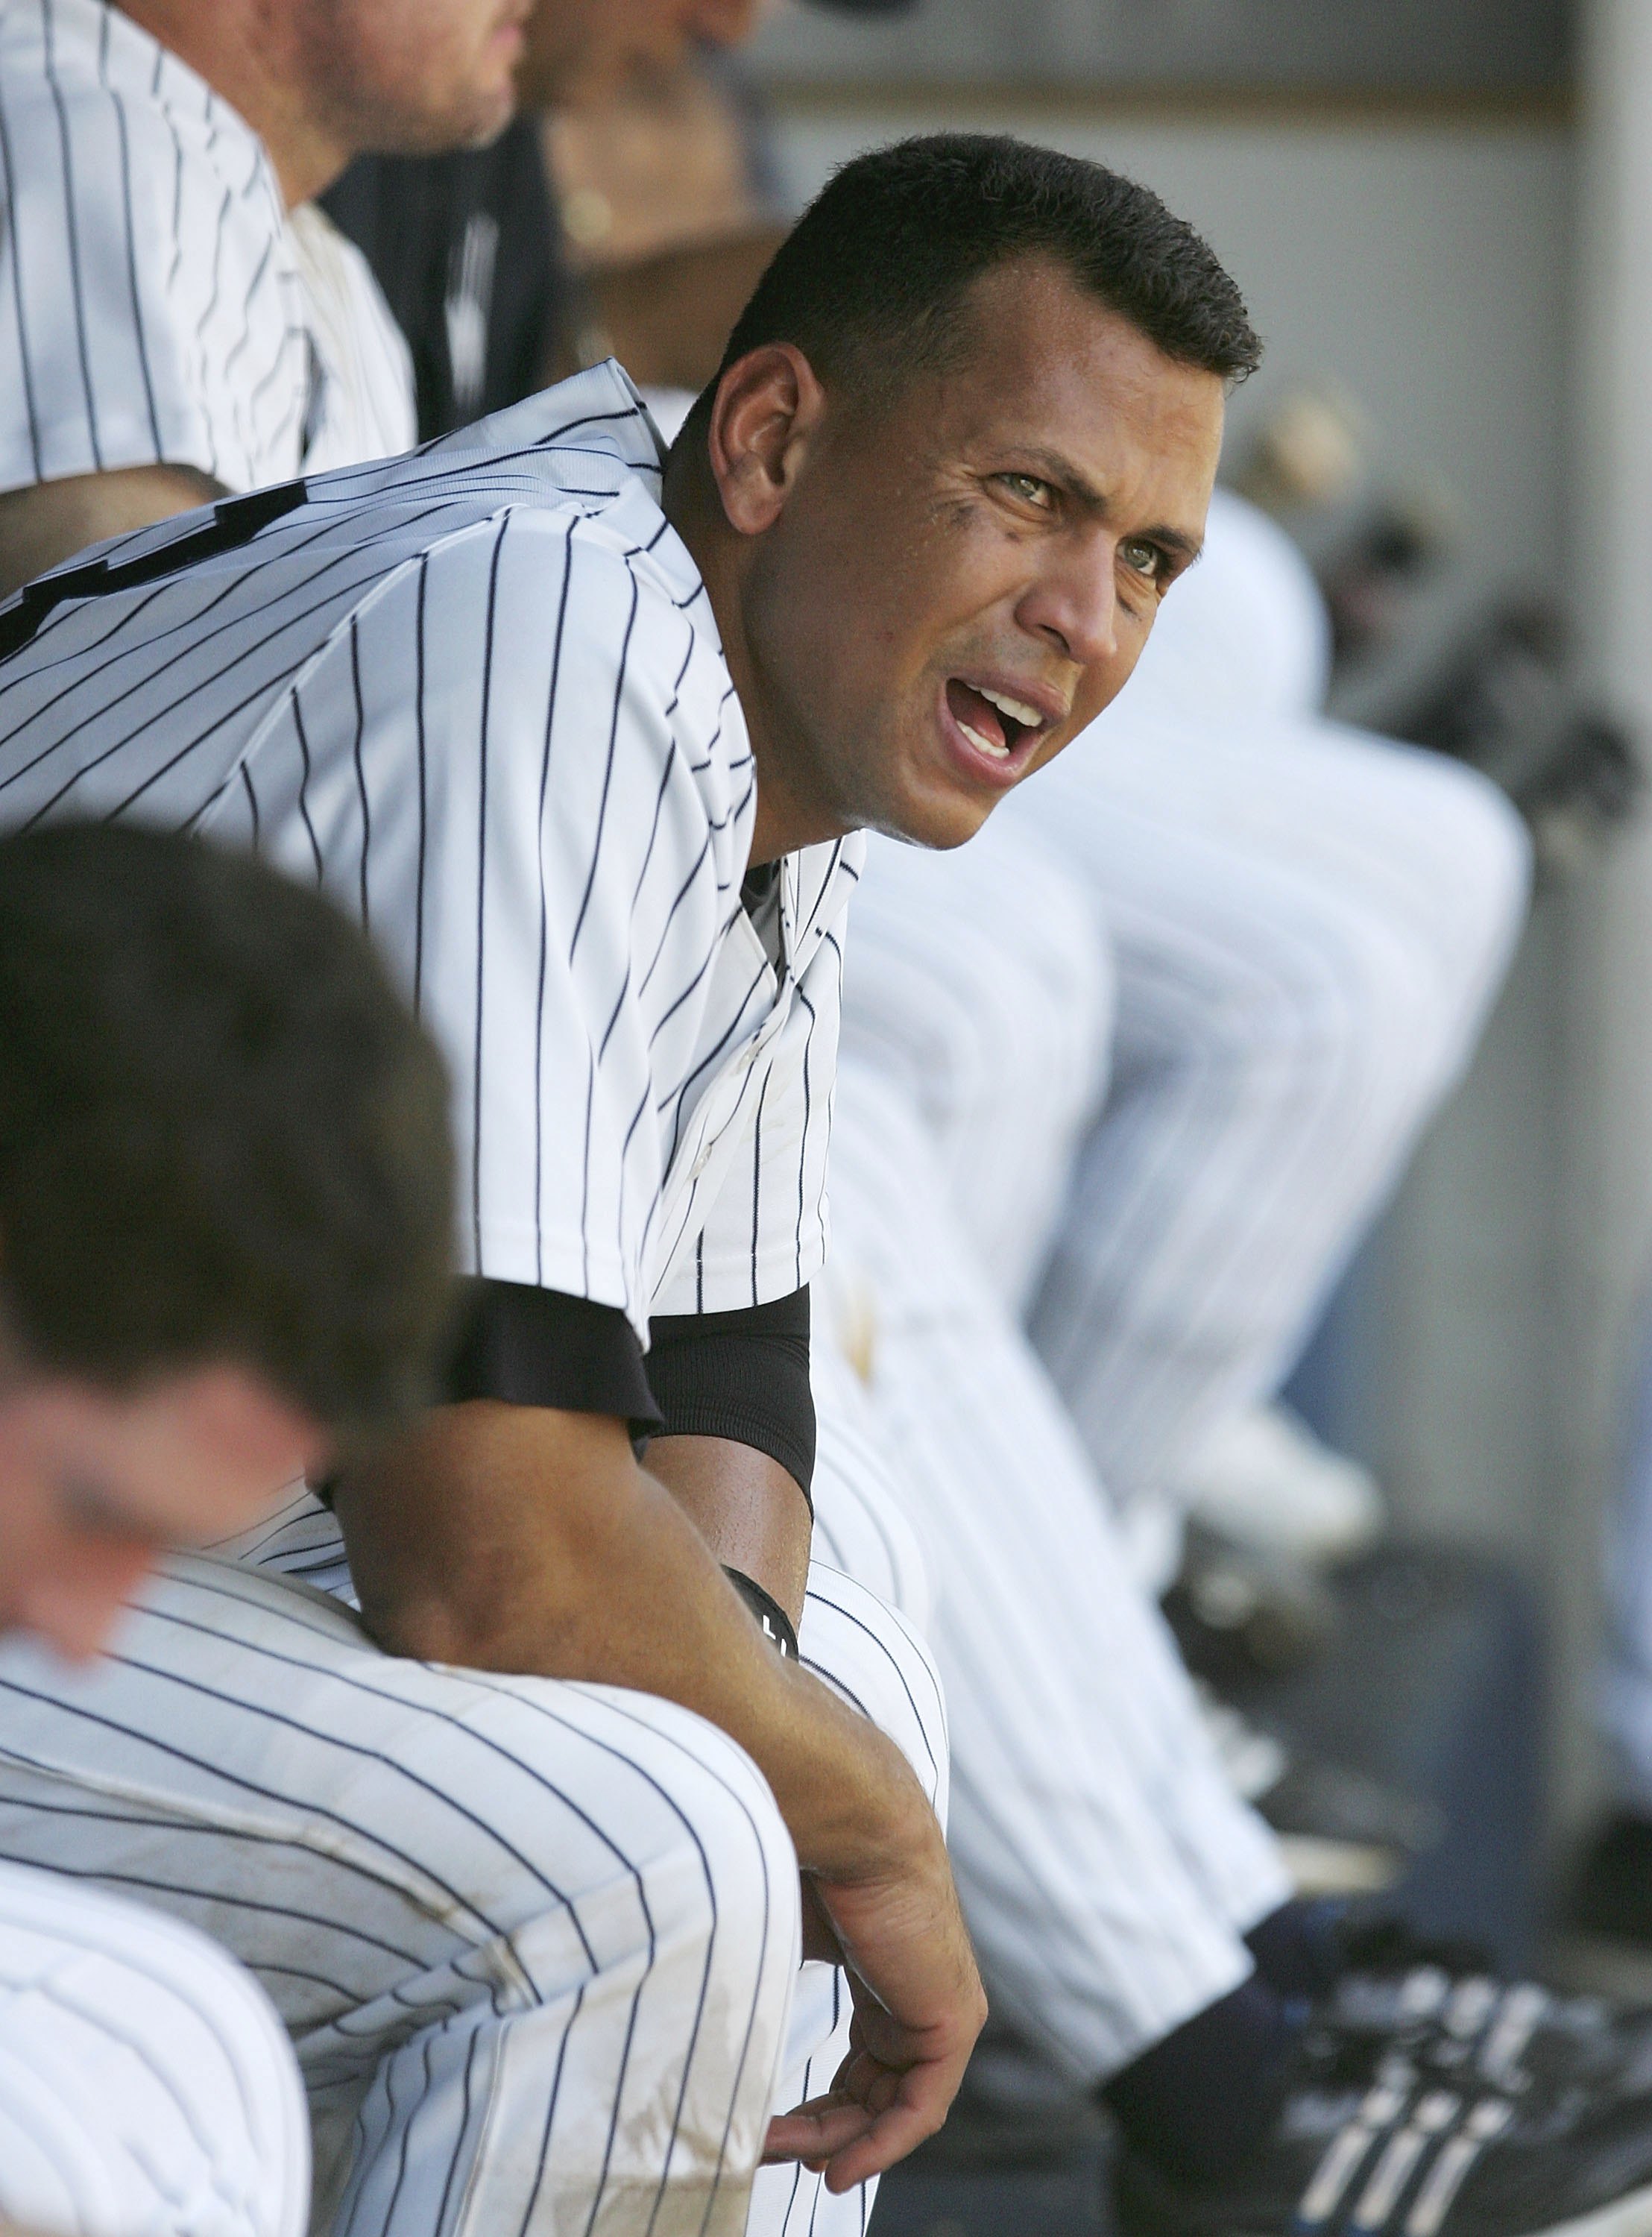 NEW YORK - JULY 19:  Alex Rodriguez #13 of the New York Yankees looks on from the dugout during the game against the Seattle Mariners at Yankee Stadium July 19, 2006 in the Bronx borough of New York City. The Mariners defeated the Yankees 3-2.  (Photo by